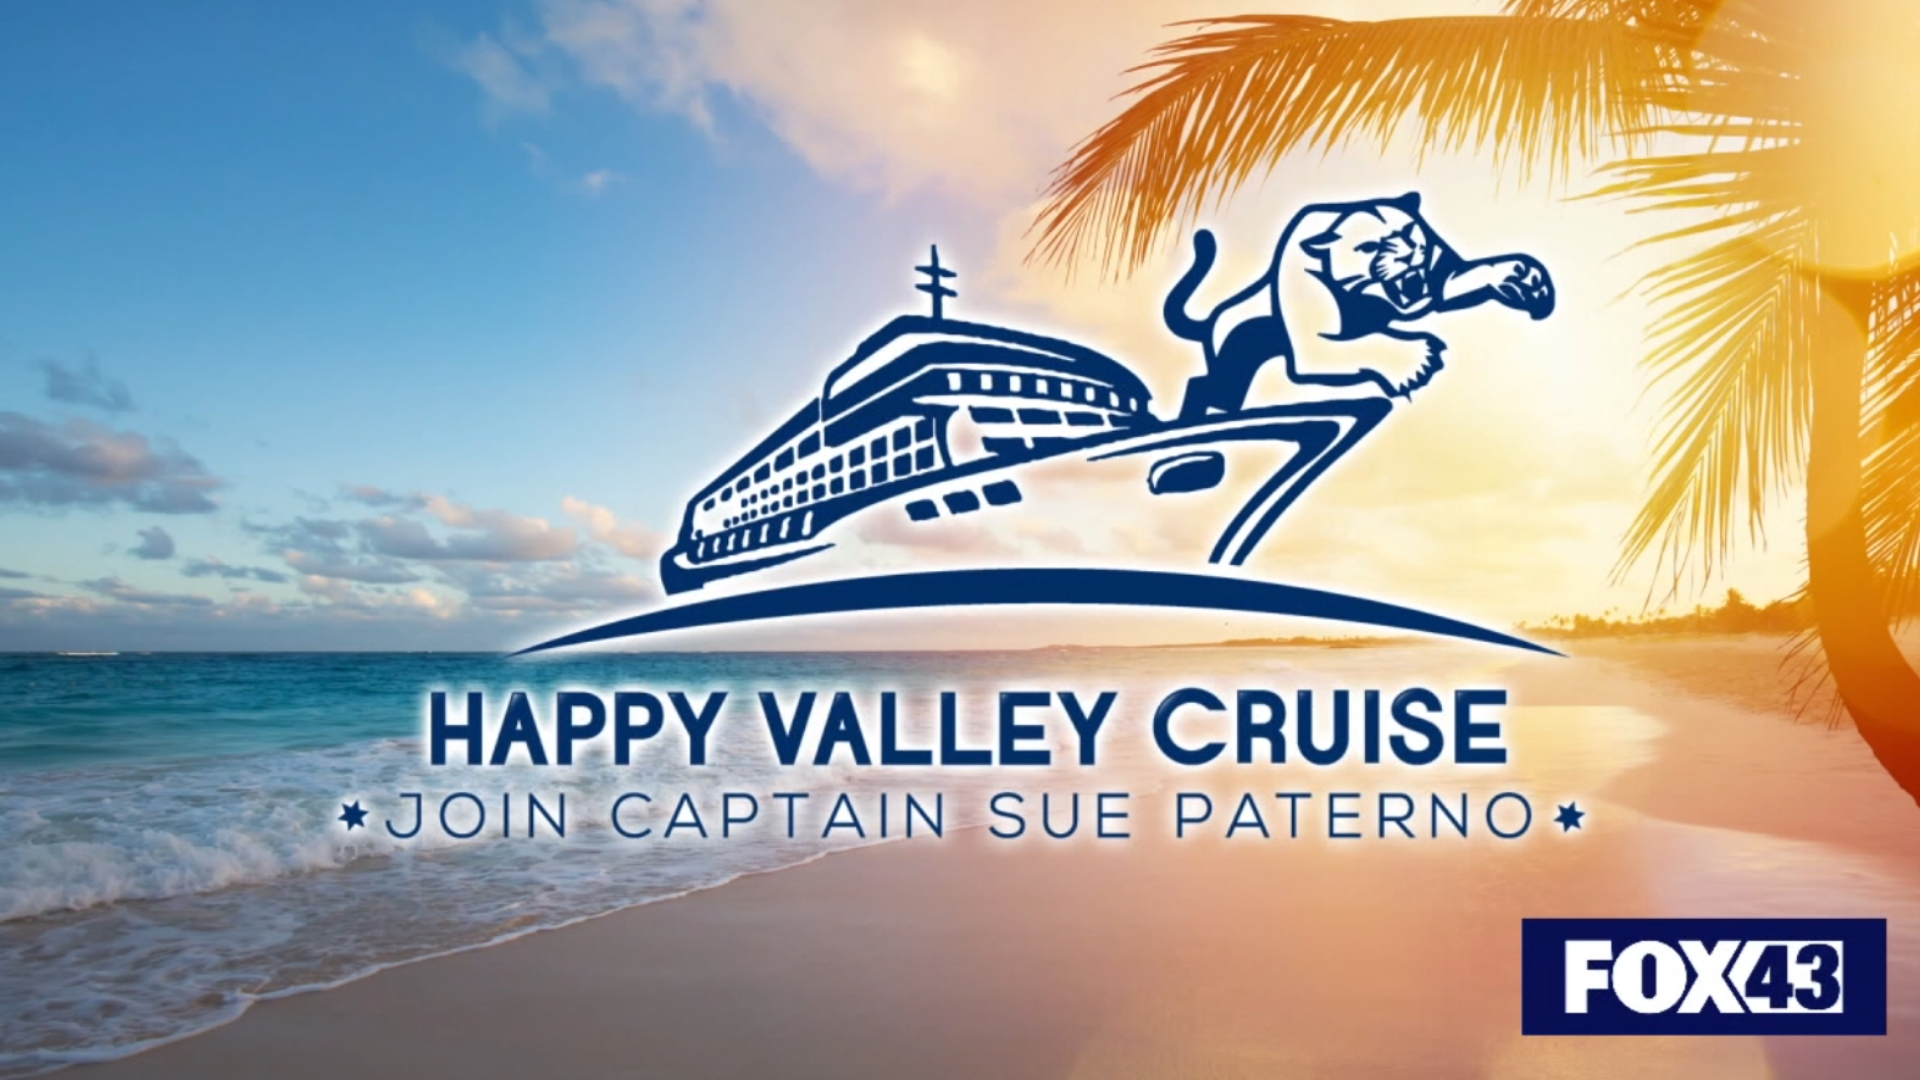 FOX43 Sports went behind-the-scenes on the 2022 Happy Valley Cruise in a preview of the Penn State football season.